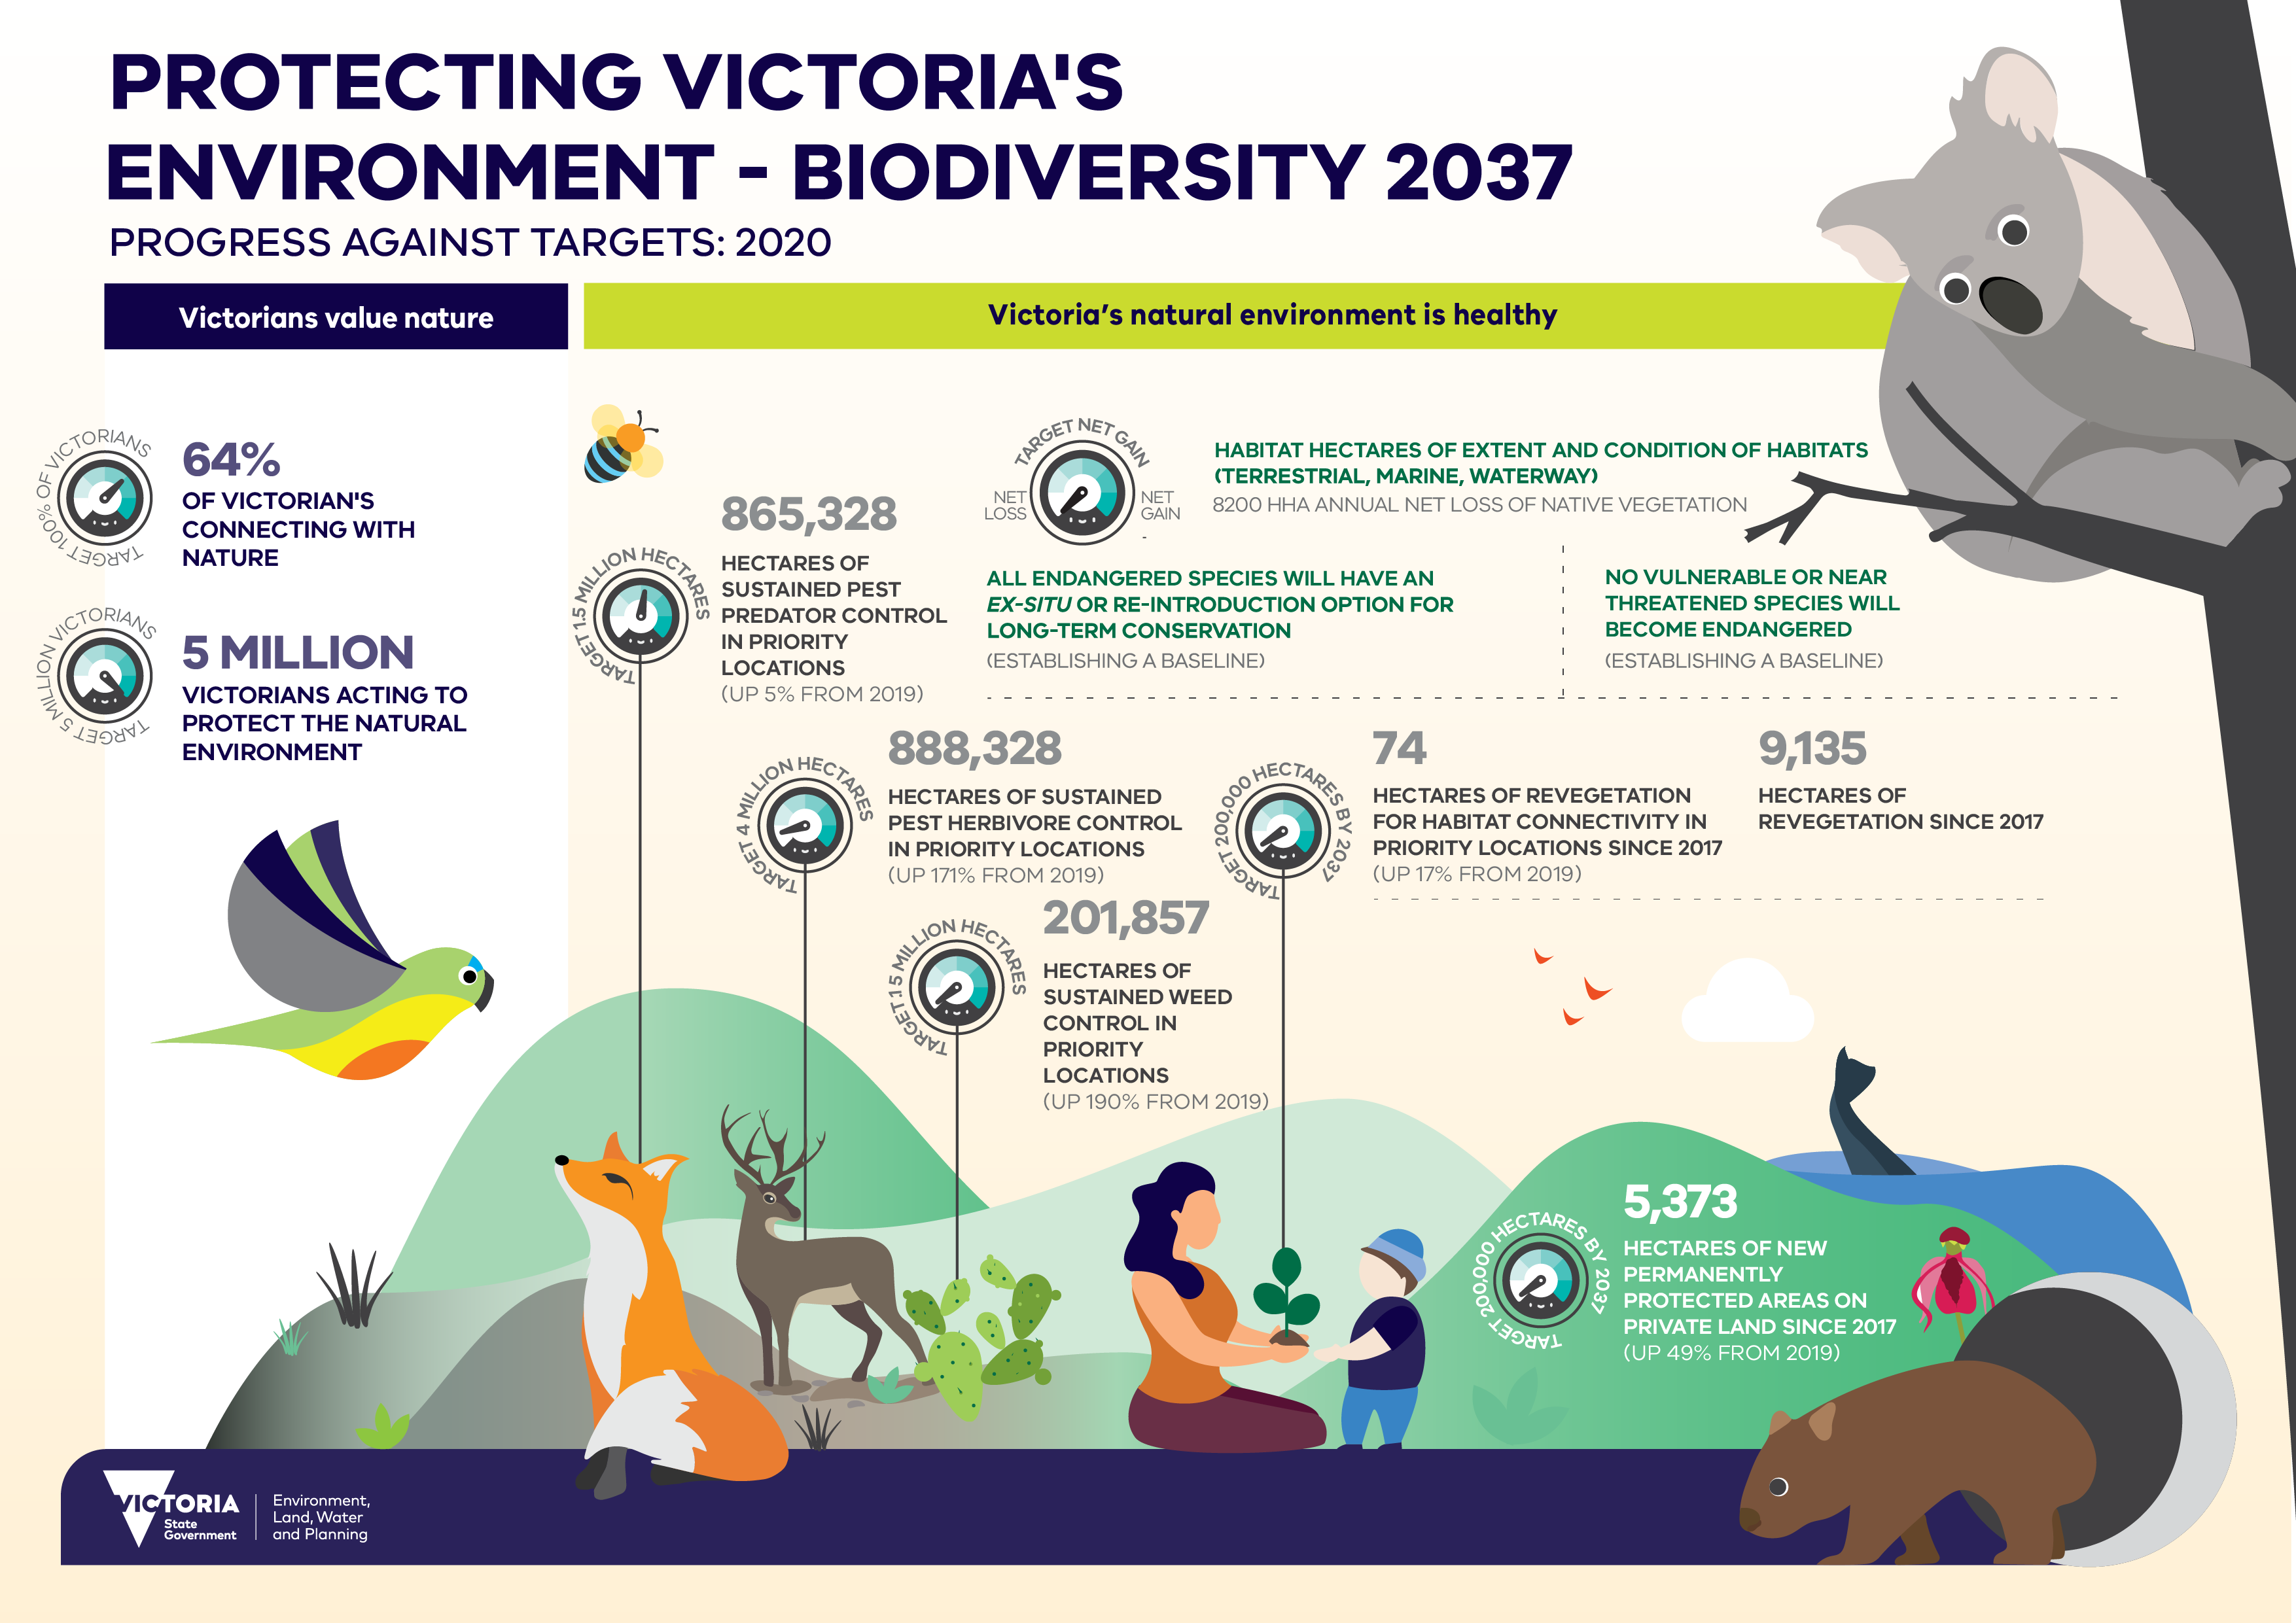 This infographic describes how Victoria is tracking against the targets in Protecting Victoria's Environment - Biodiversity 2037 in 2020. It features a header with the text ‘Protecting Victoria’s Environment - Biodiversity 2037 progress against targets: 2020’. It has the DELWP Victorian Government logo in the bottom left corner. The infographic features several designed graphics of animals, plants, landscapes, and people. It also features invasive species such as foxes and deer.  Under the title are two columns that show progress against the Biodiversity 2037 Plan targets in 2020 with corresponding graphical icons, they include the following:  Victorians Value Nature  *First icon with text ‘Target 100% of Victorians’ oNext to the icon is the text ‘64% of Victorian’s connecting with nature’  *Second icon with text ‘Target 5 million Victorians’ oNext to the icon is the text ‘5 million Victorians acting to protect the natural environment’  Victoria’s natural environment is healthy  *Third icon with text ‘Net loss’ on the left side, then ‘target net gain’ in the centre, then ‘net gain’ on the right side. oNext to the icon is the text ‘Habitat hectares of extent and condition of habitats (terrestrial, marine, waterway) Under this is the result from this with the text ‘8200 hectares annual net loss of native vegetation’ oUnder this is the text ‘All endangered species will have an ex-situ or re-introduction option for long-term conservation’ Under this is the result from this with the text ‘establishing a baseline’ oUnder this is the text ‘No vulnerable species or near threatened species will become endangered’ Under this is the result from this with the text ‘Establishing a baseline’  *Fourth icon with text ‘Target 1.5 million hectares’ oNext to the icon is the text ‘865,328 hectares of sustained pest predator control in priority locations’  *Fifth icon with text ‘Target 4 million hectares’ oNext to the icon is the text ‘888,328 hectares of sustained pest herbivore control in priority locations’     *Sixth icon with text ‘Target 200,000 hectares’ oNext to the icon is the text ‘74 hectares of revegetation for habitat connectivity in priority locations since 2017’ and ‘9,135 hectares of revegetation since 2017’  *Seventh icon with text ‘Target 1.5 million hectares’ oNext to the icon is the text ‘201,857 hectares of sustained weed control in priority locations’  *Eighth icon with text ‘Target 200,000 hectares’ oNext to the icon is the text ‘5,373 hectares of new permanently protected areas on private land since 2017’  That is the end of the infographic.